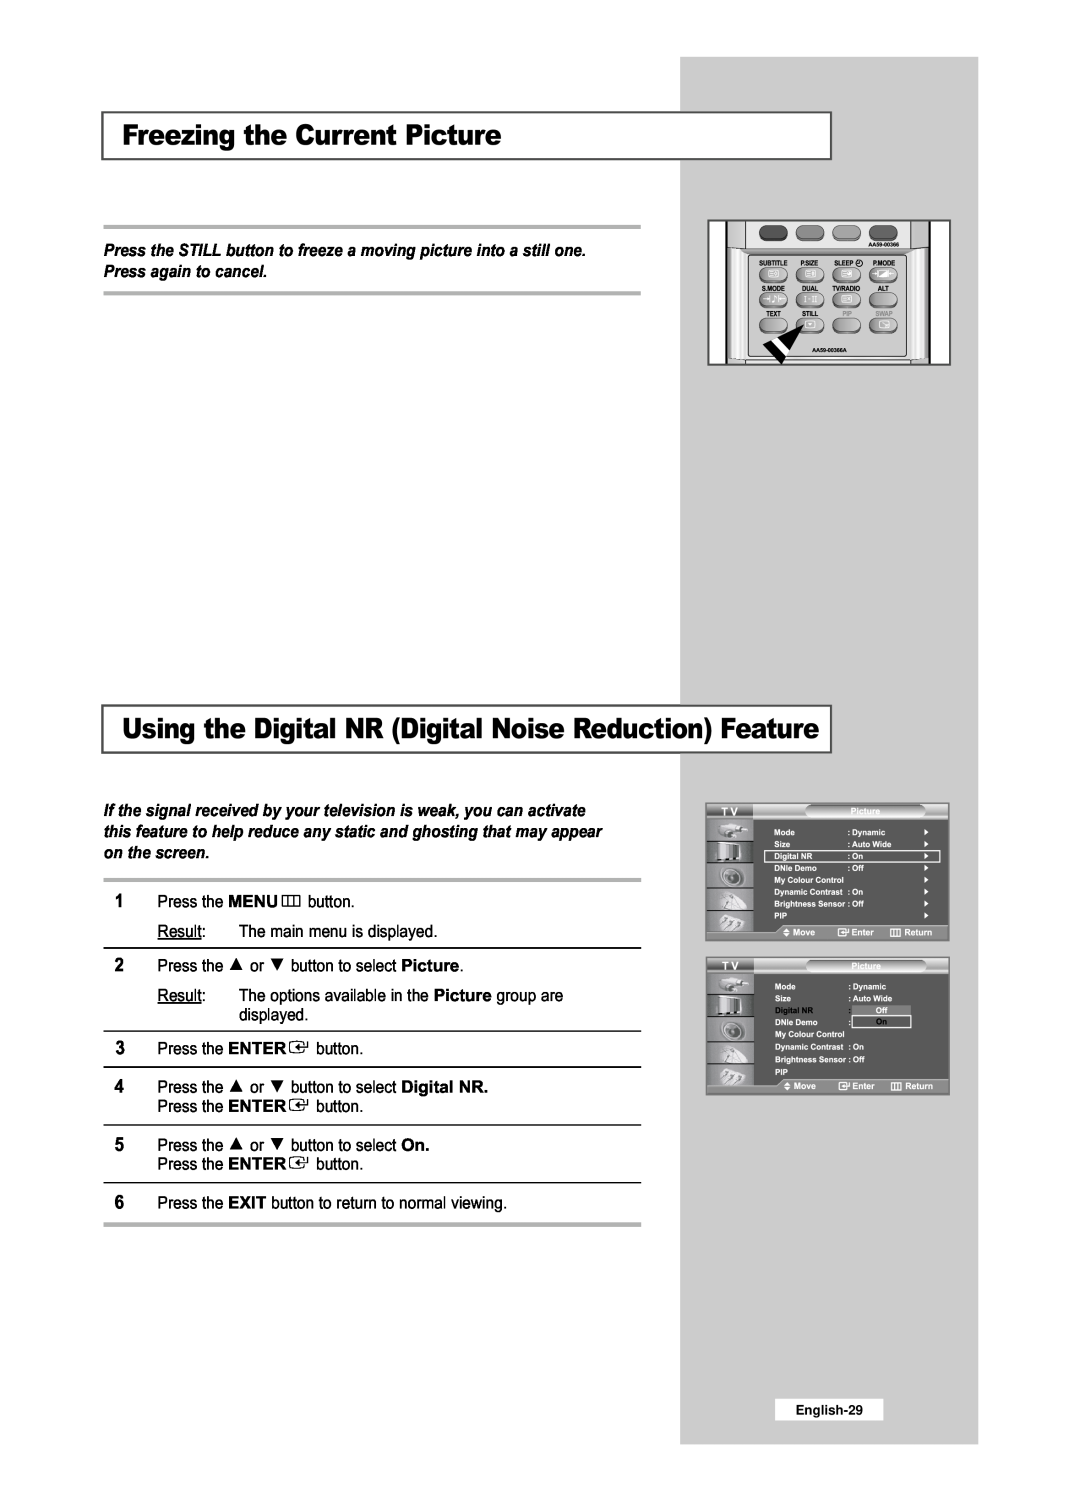 Samsung LE26R53BD, LE32R53BD manual Freezing the Current Picture, Using the Digital NR Digital Noise Reduction Feature 